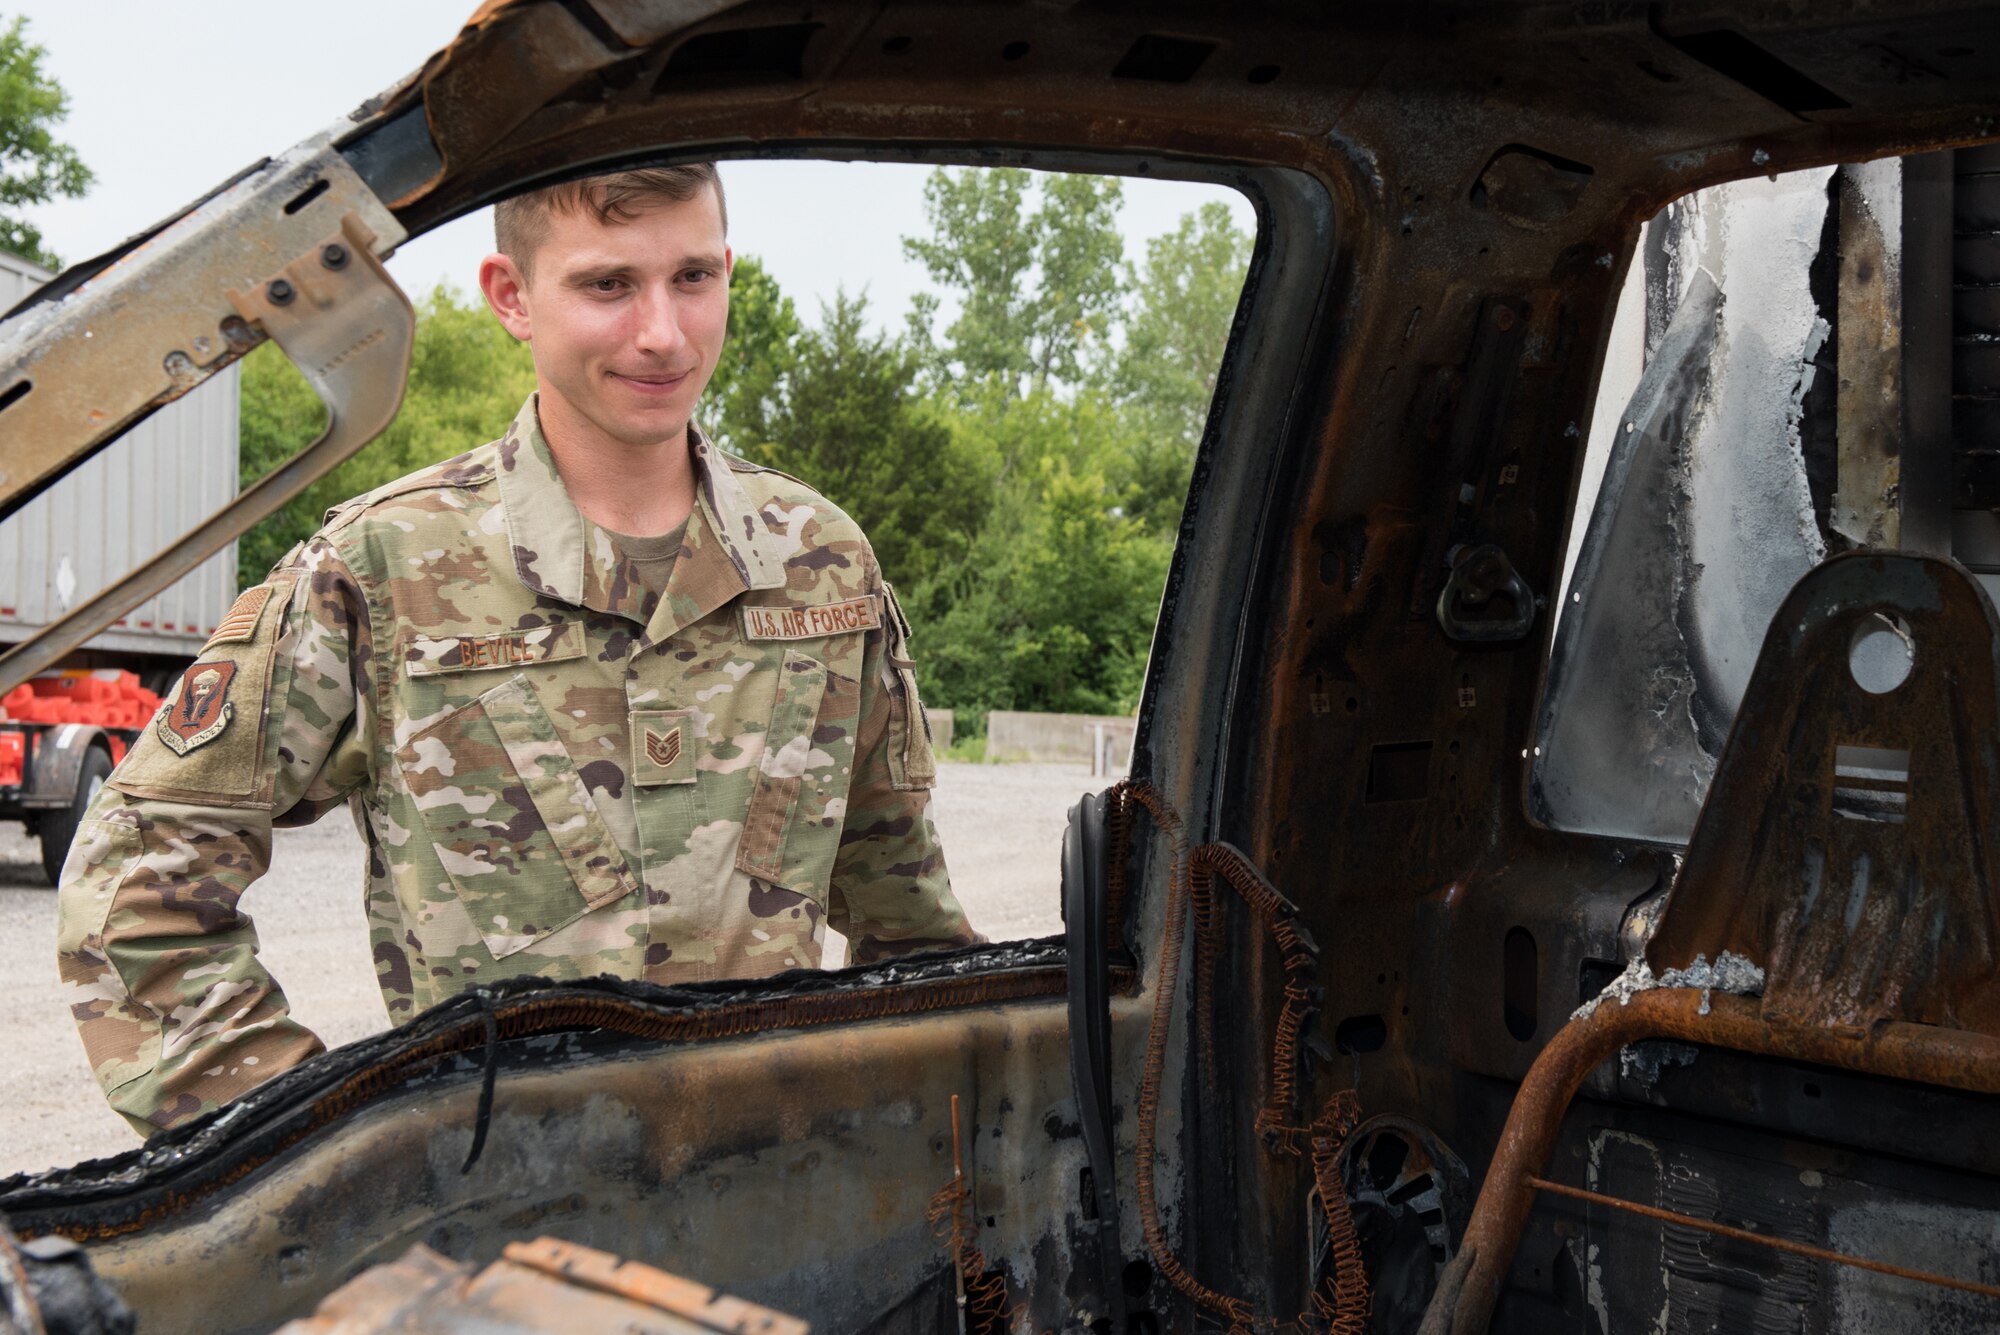 U.S. Air Force Tech. Sgt. Chase Bevill, 509th Bomb Wing safety specialist, inspects a vehicle mishap at Whiteman Air Force Base, Missouri, on July 14, 2020. Safety specialists deal with investigating mishaps that occur on base and sometimes off base. (U.S. Air Force photo by Airman 1st Class Christina Carter)